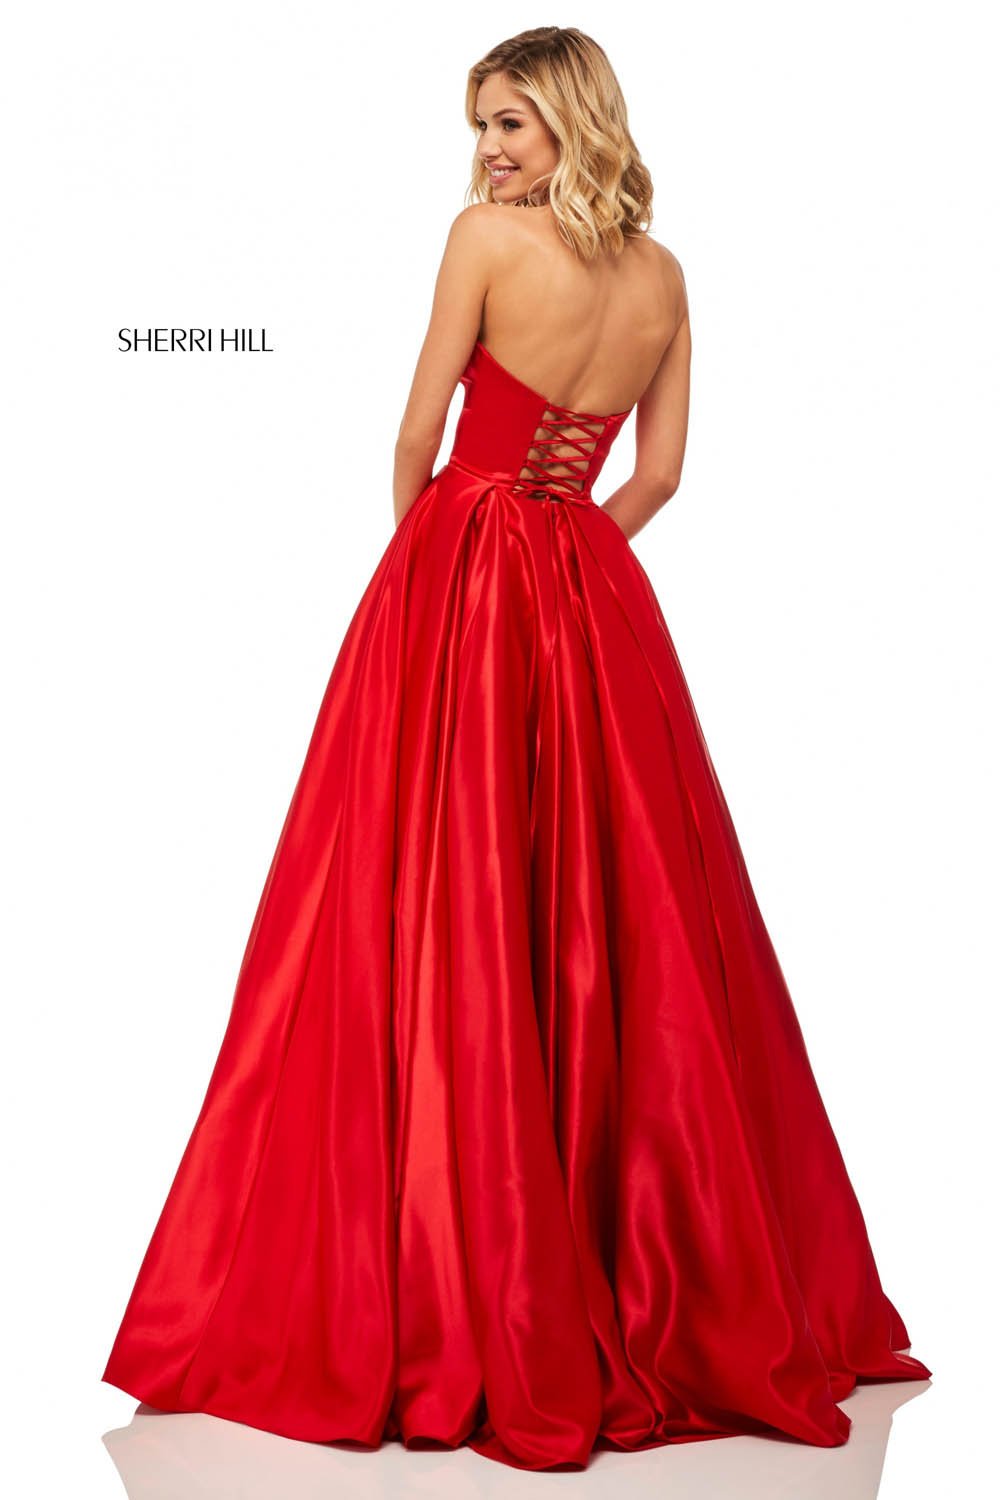 Sherri Hill 52850 dress images in these colors: Yellow, Emerald, Red, Ivory, Lilac, Royal, Light Blue, Navy, Nude, Black.